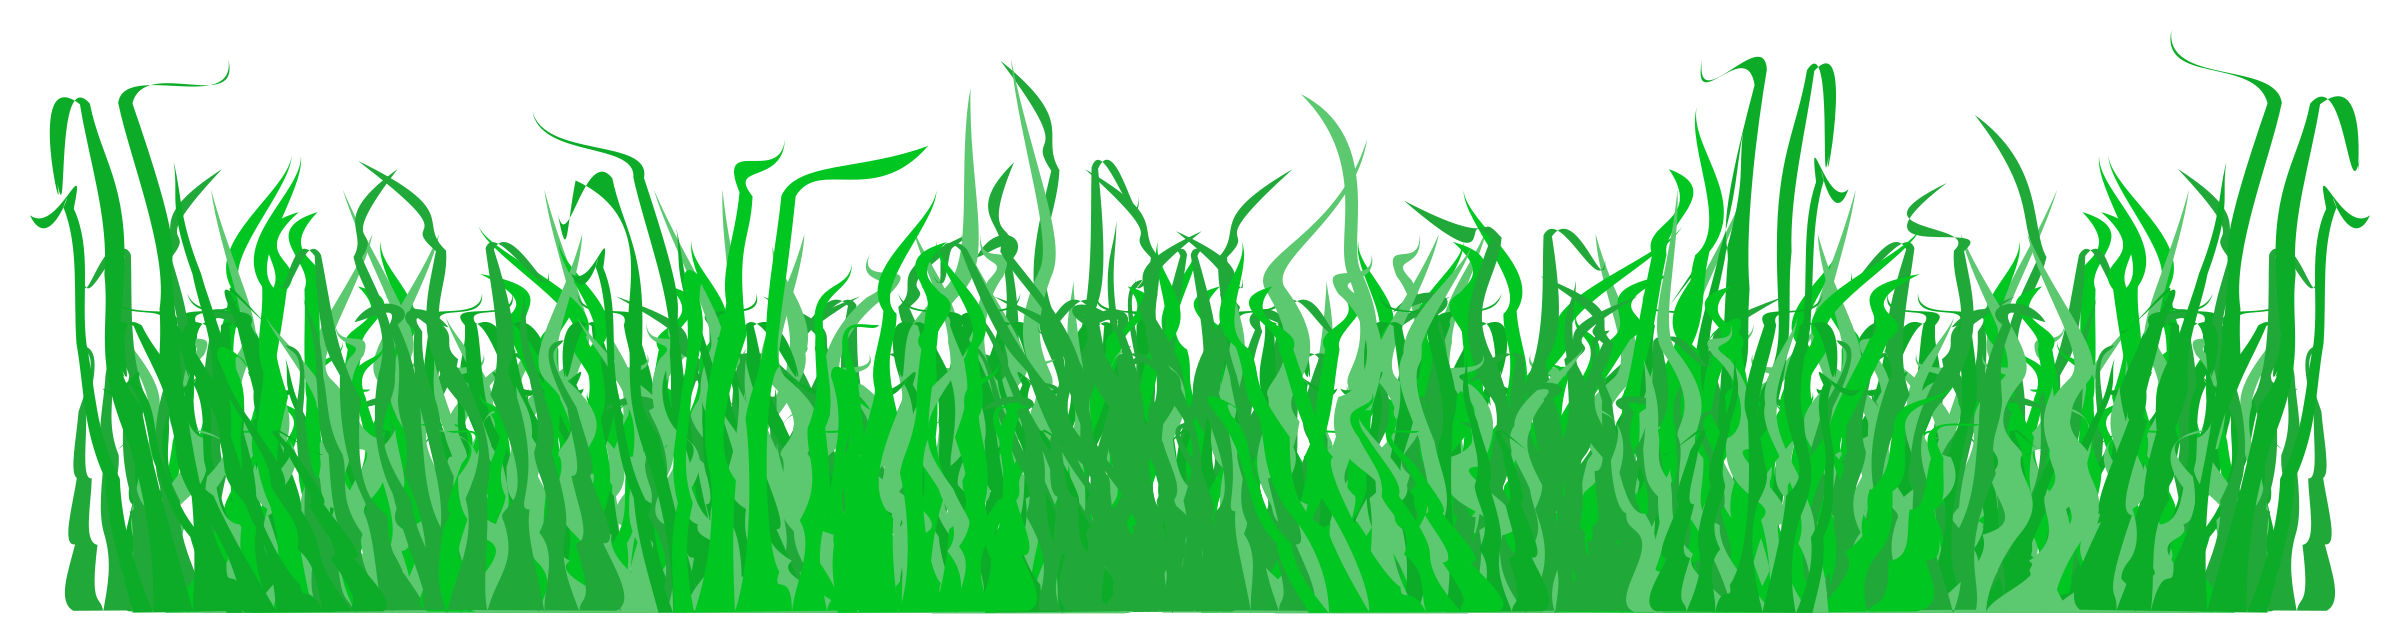 png clipart grass - photo #26